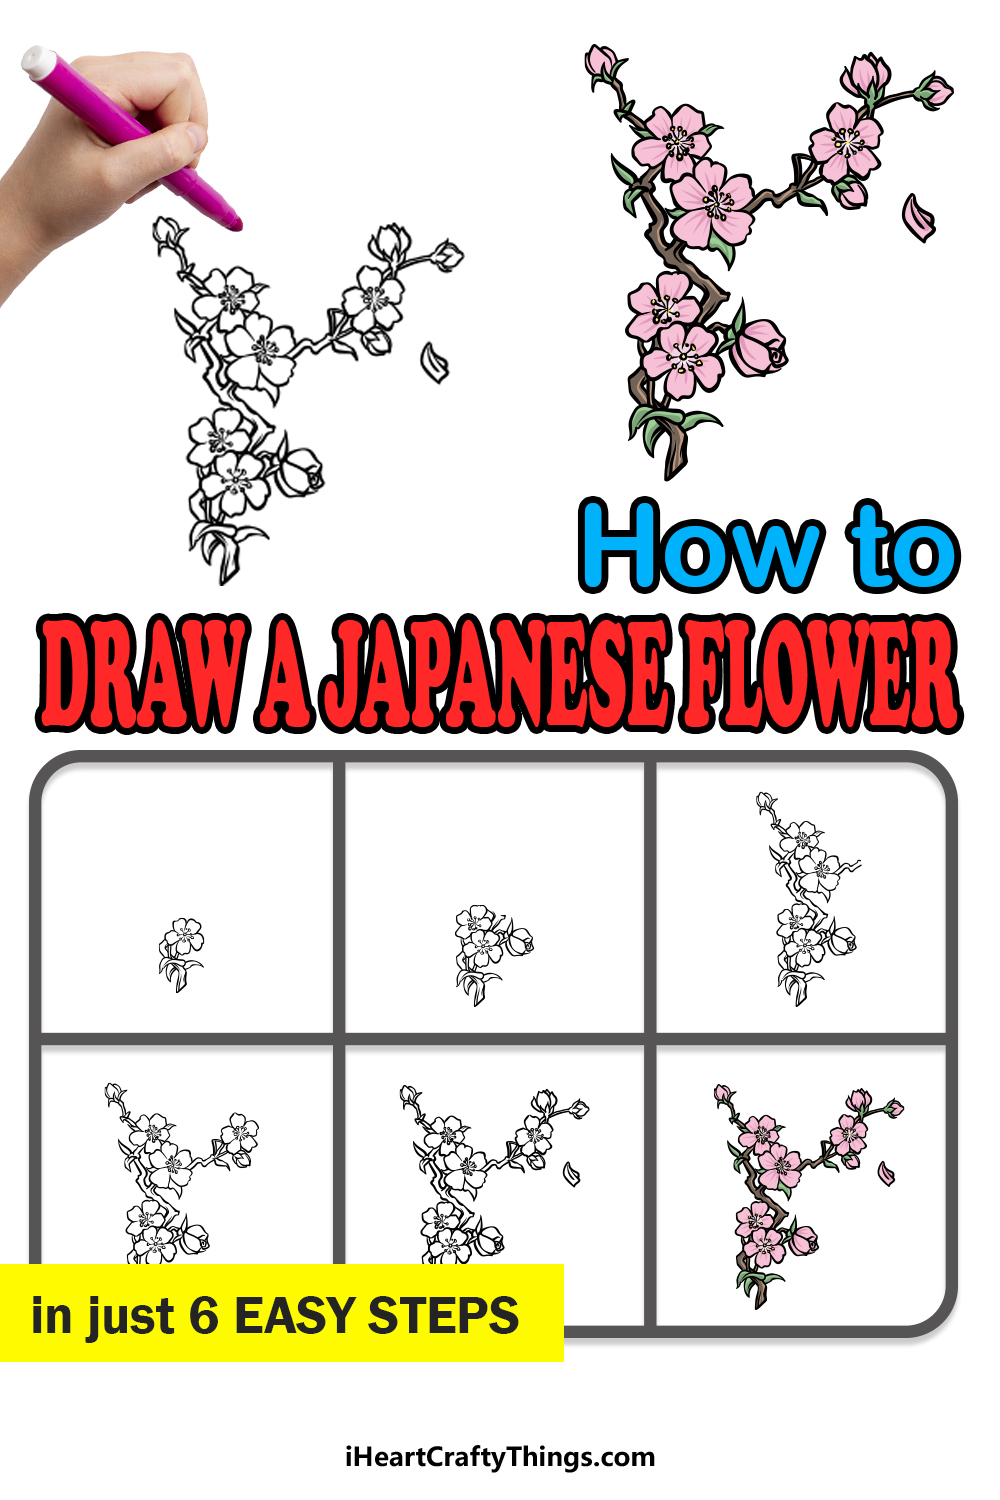 how to draw a Japanese flower in 6 easy steps